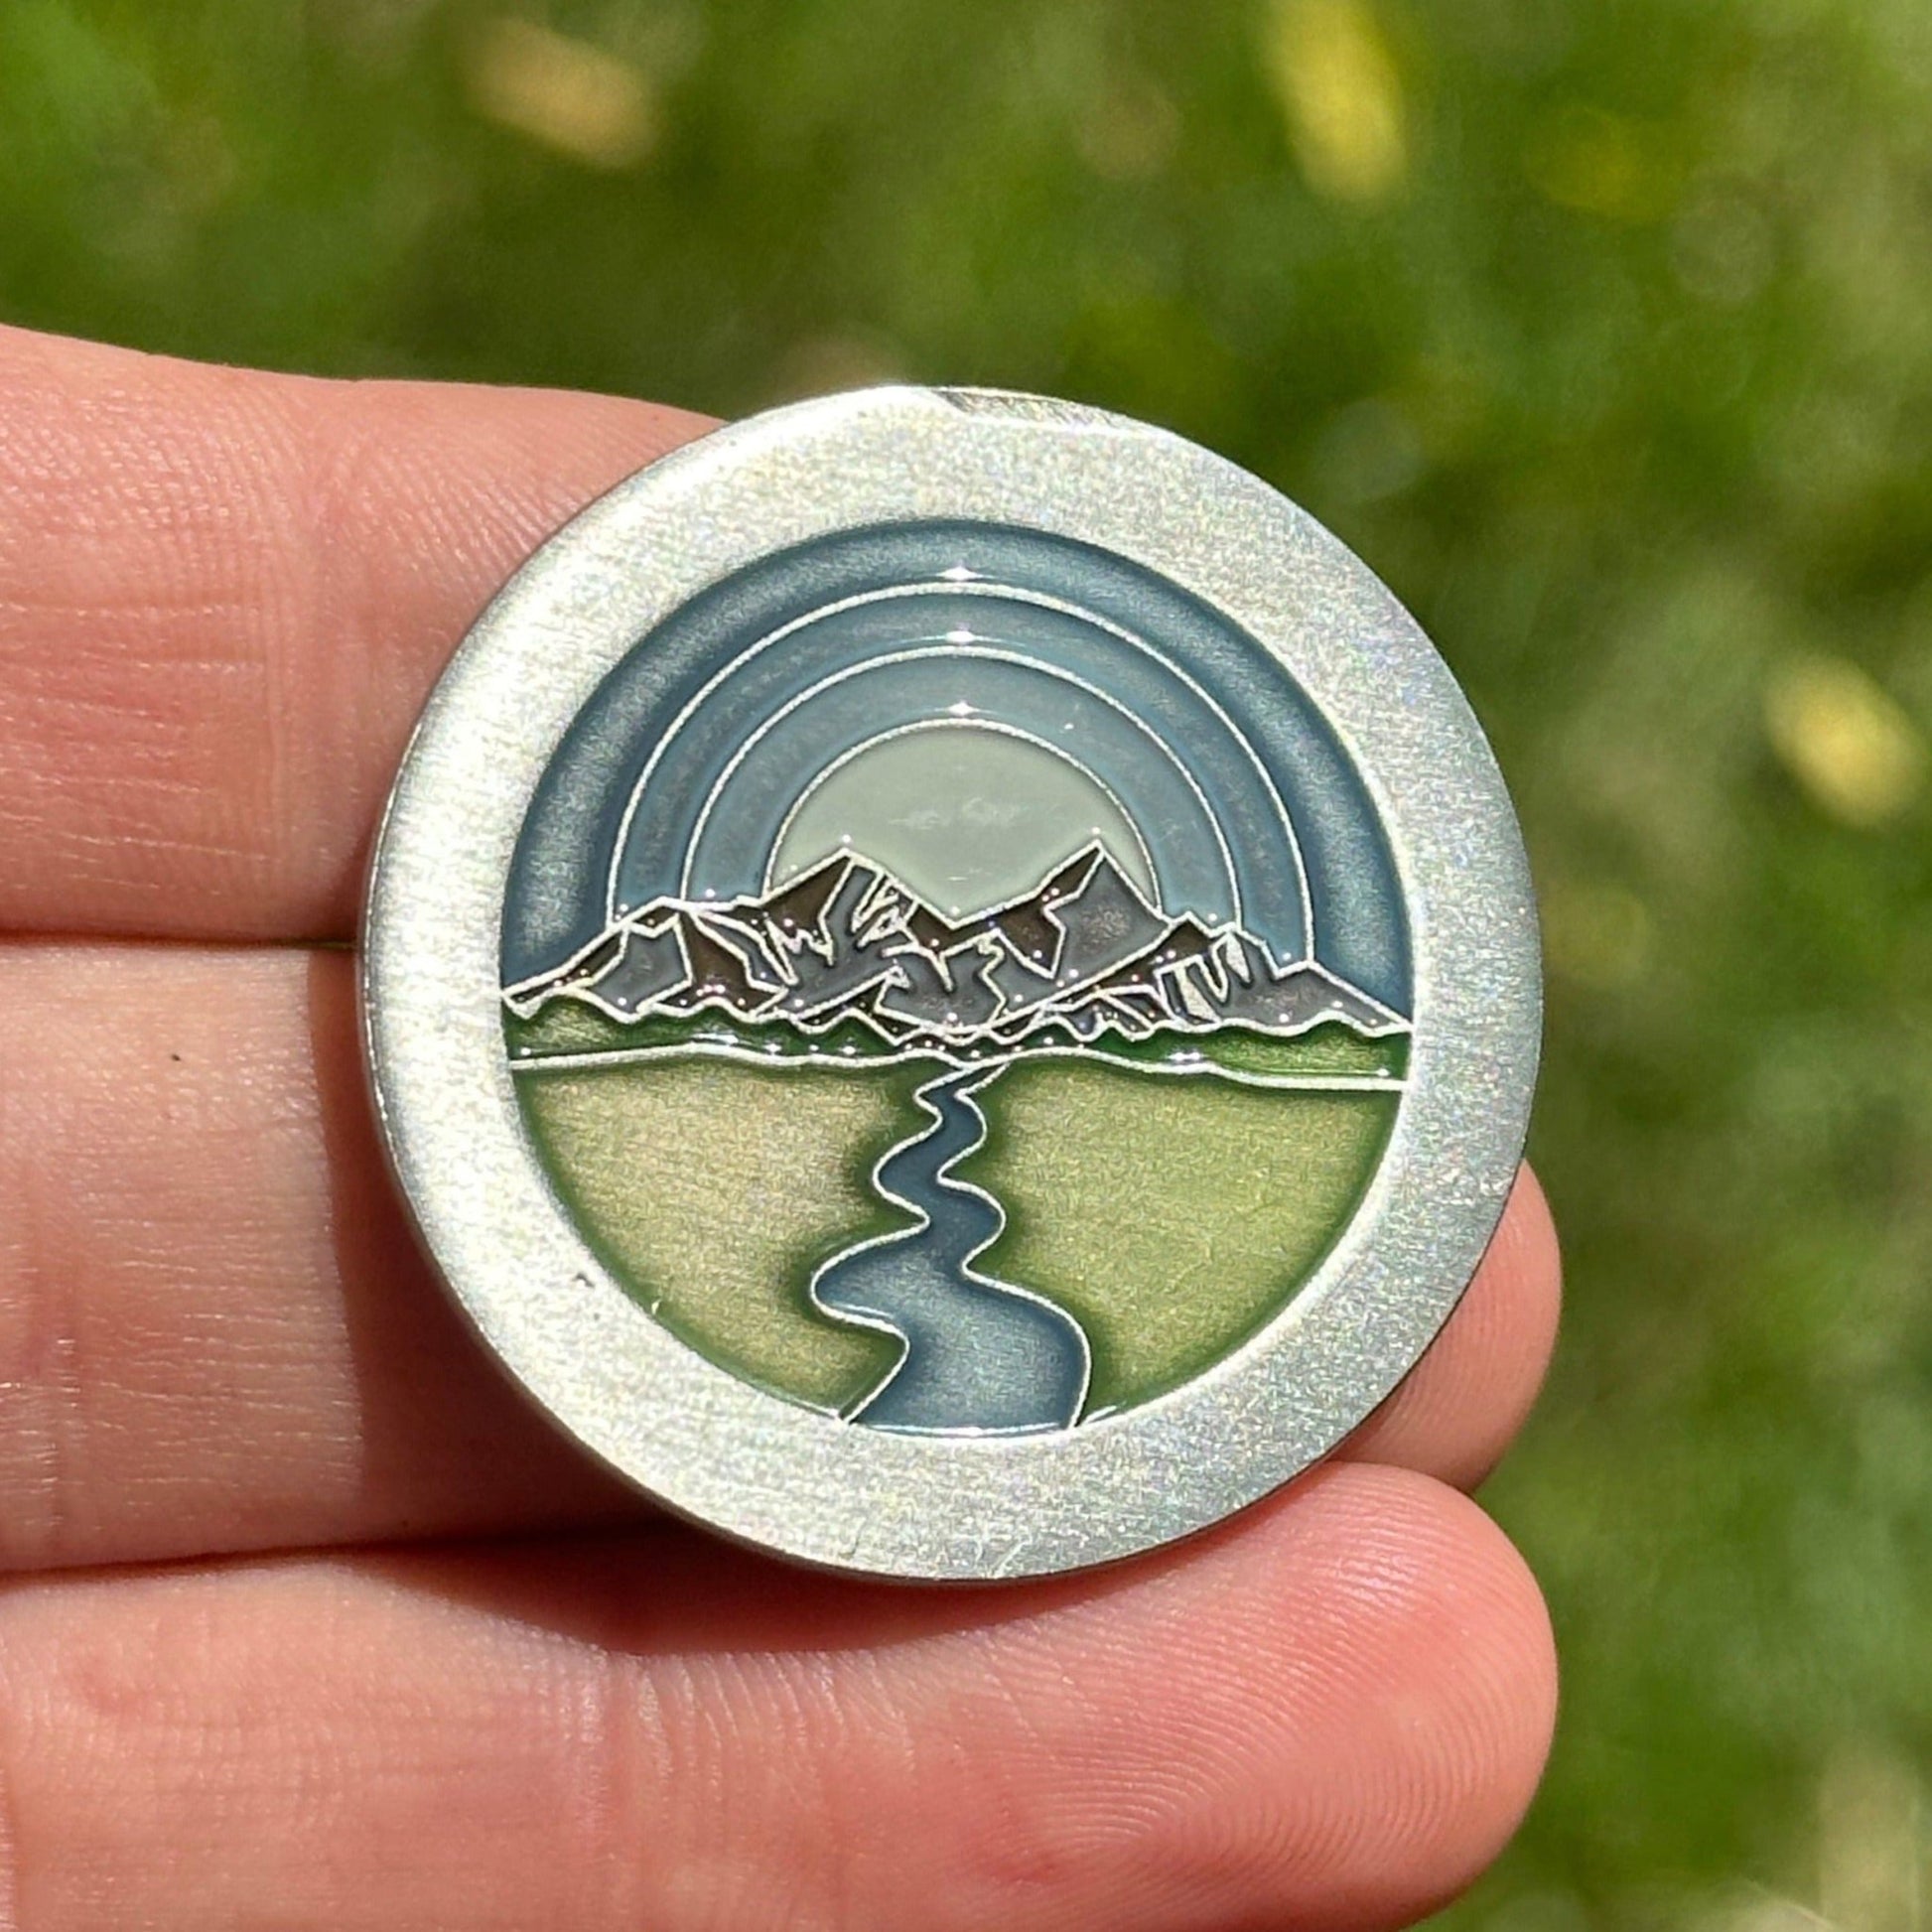 Personalized Color Mountain Stream coin - The Achieve Mint